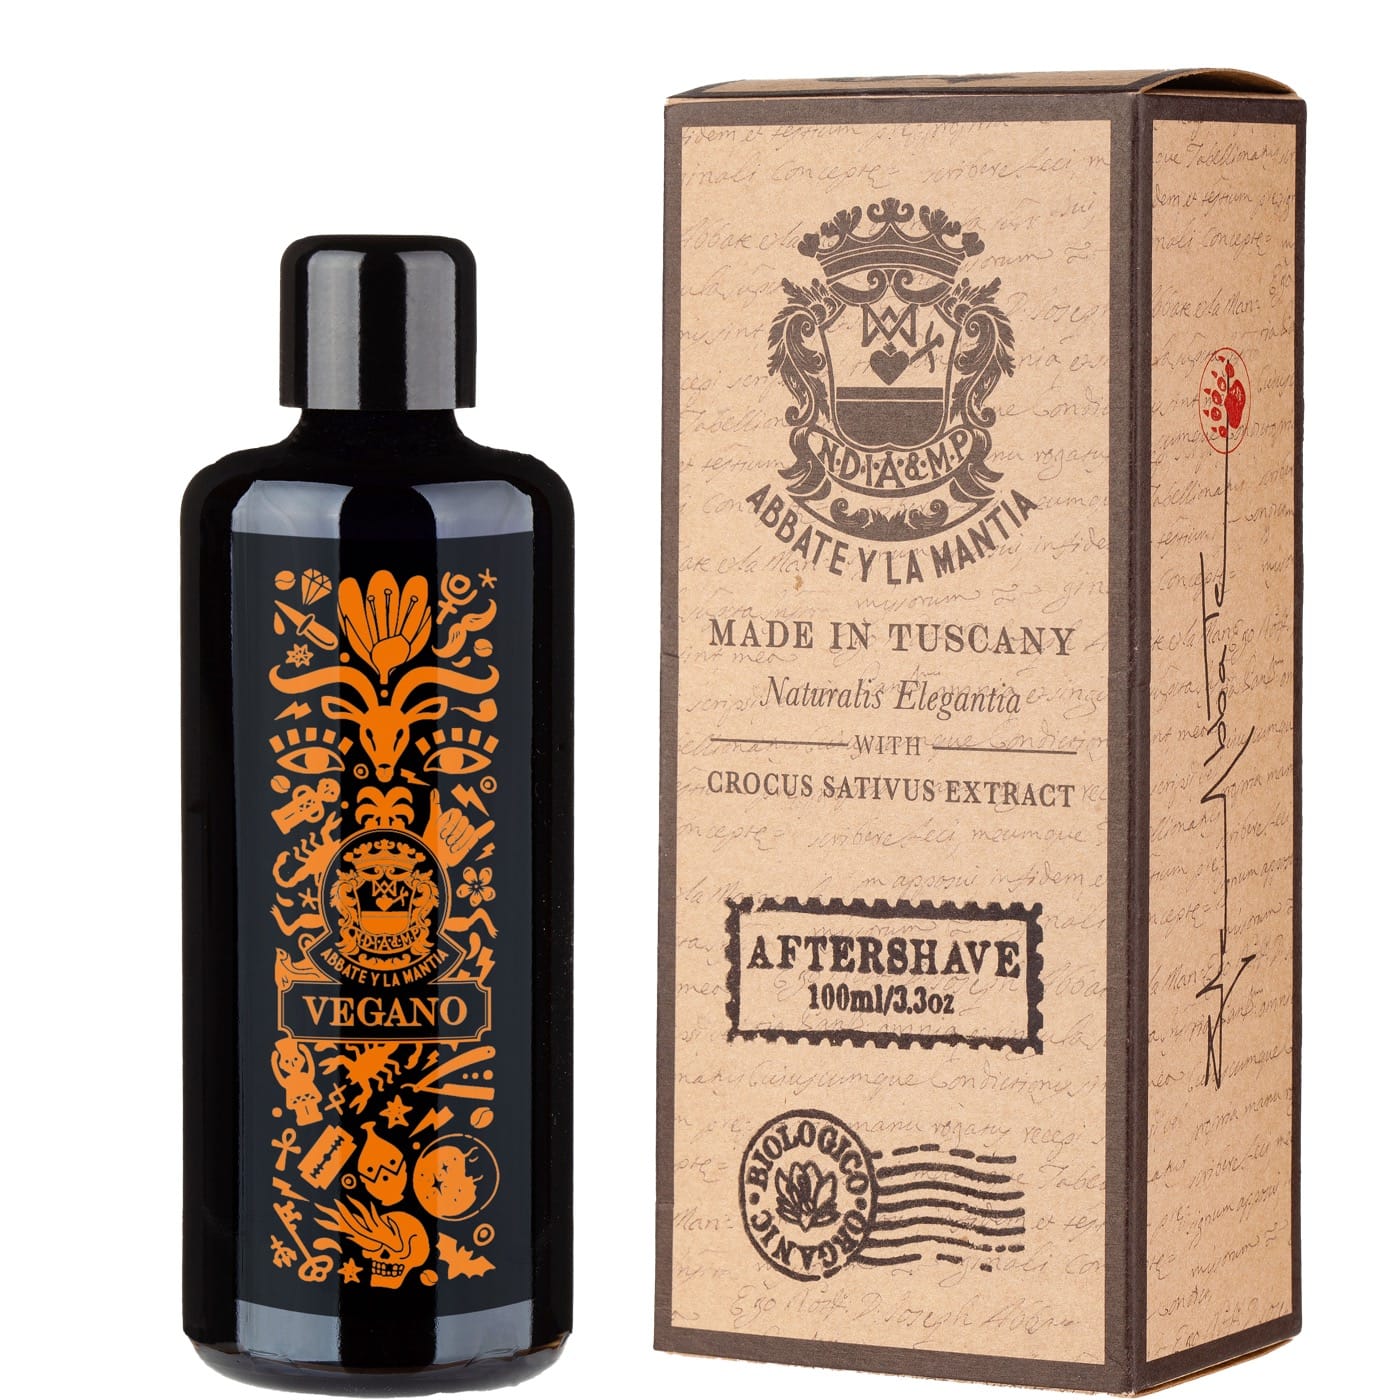 Aftershave Lotion Vegano